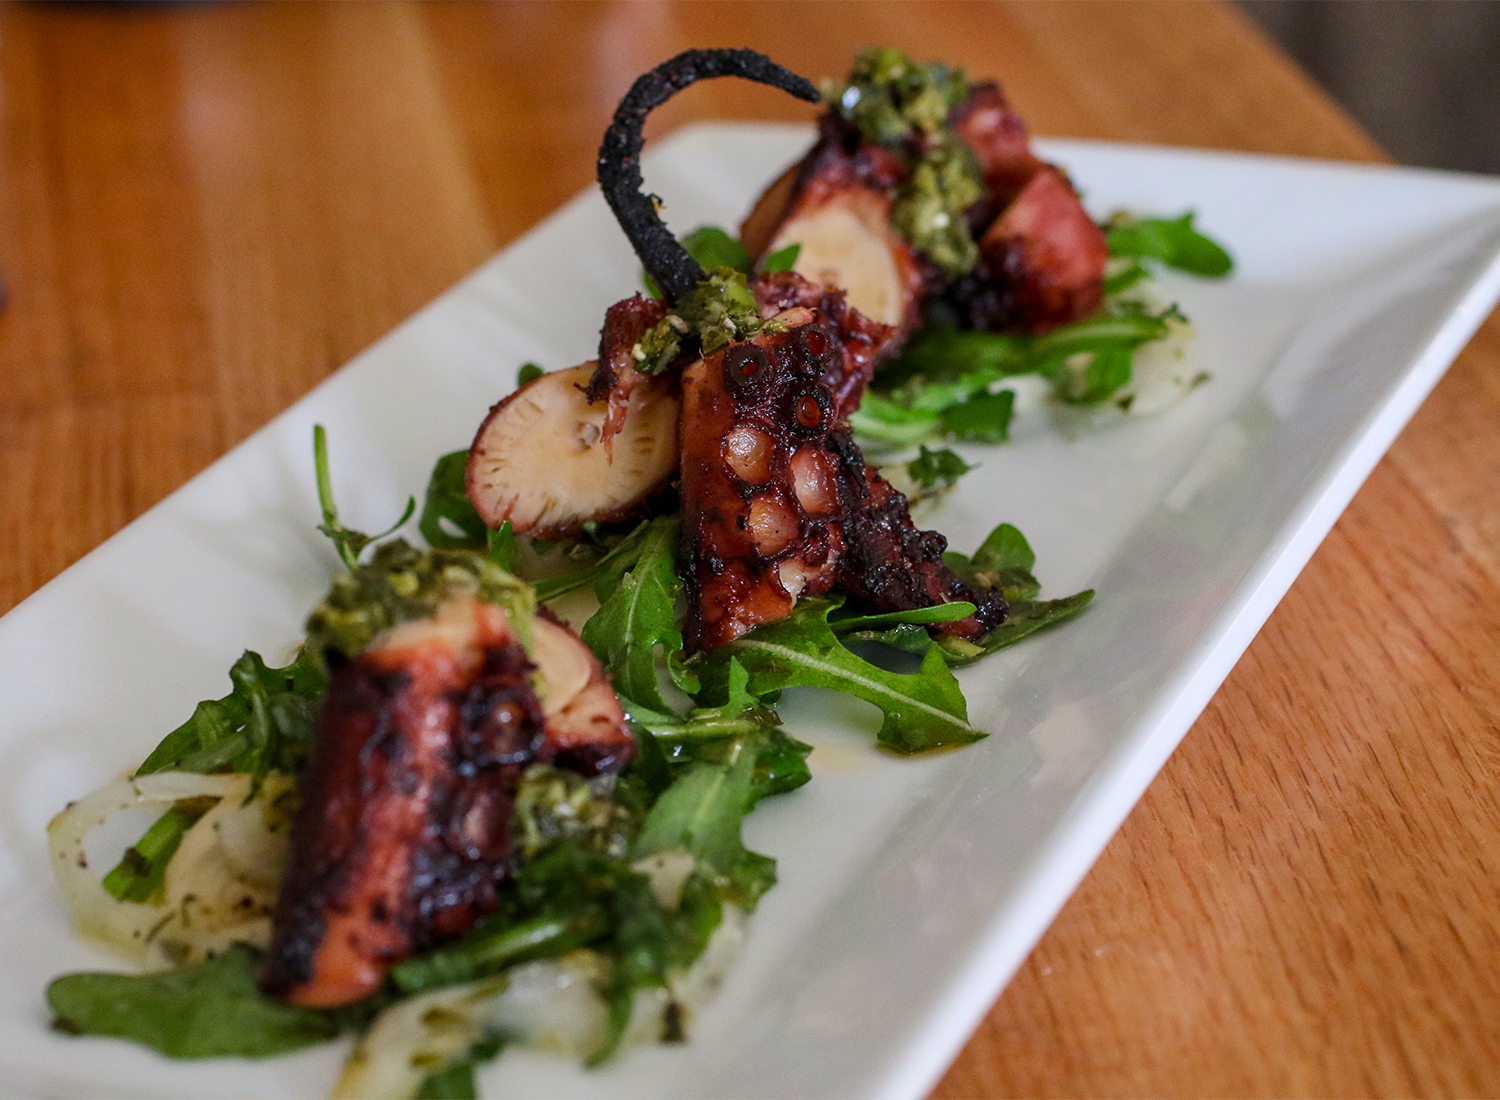 Grilled octopus at Perch and Plow restaurant in Santa Rosa.